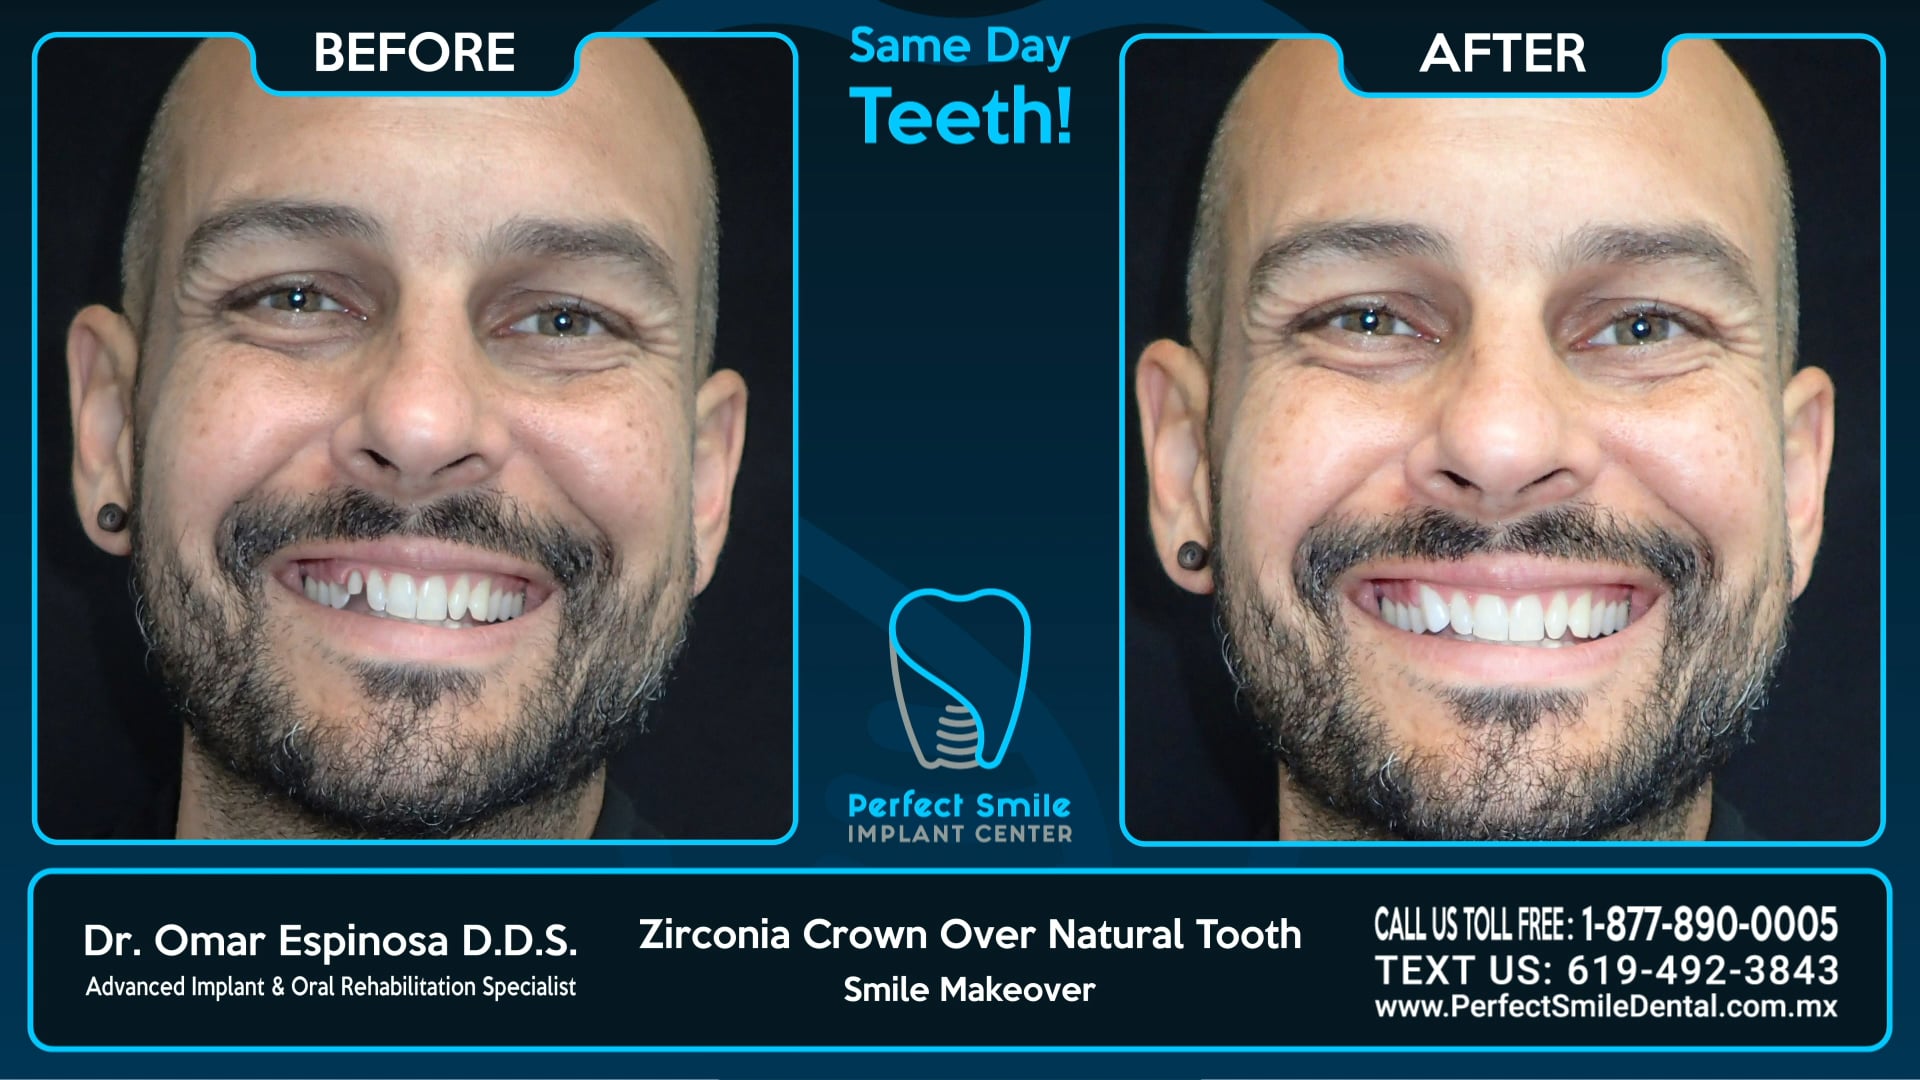 Zirconia Crown Over Natural Tooth - Perfect Smile Implant Center - Tijuana, Mexico